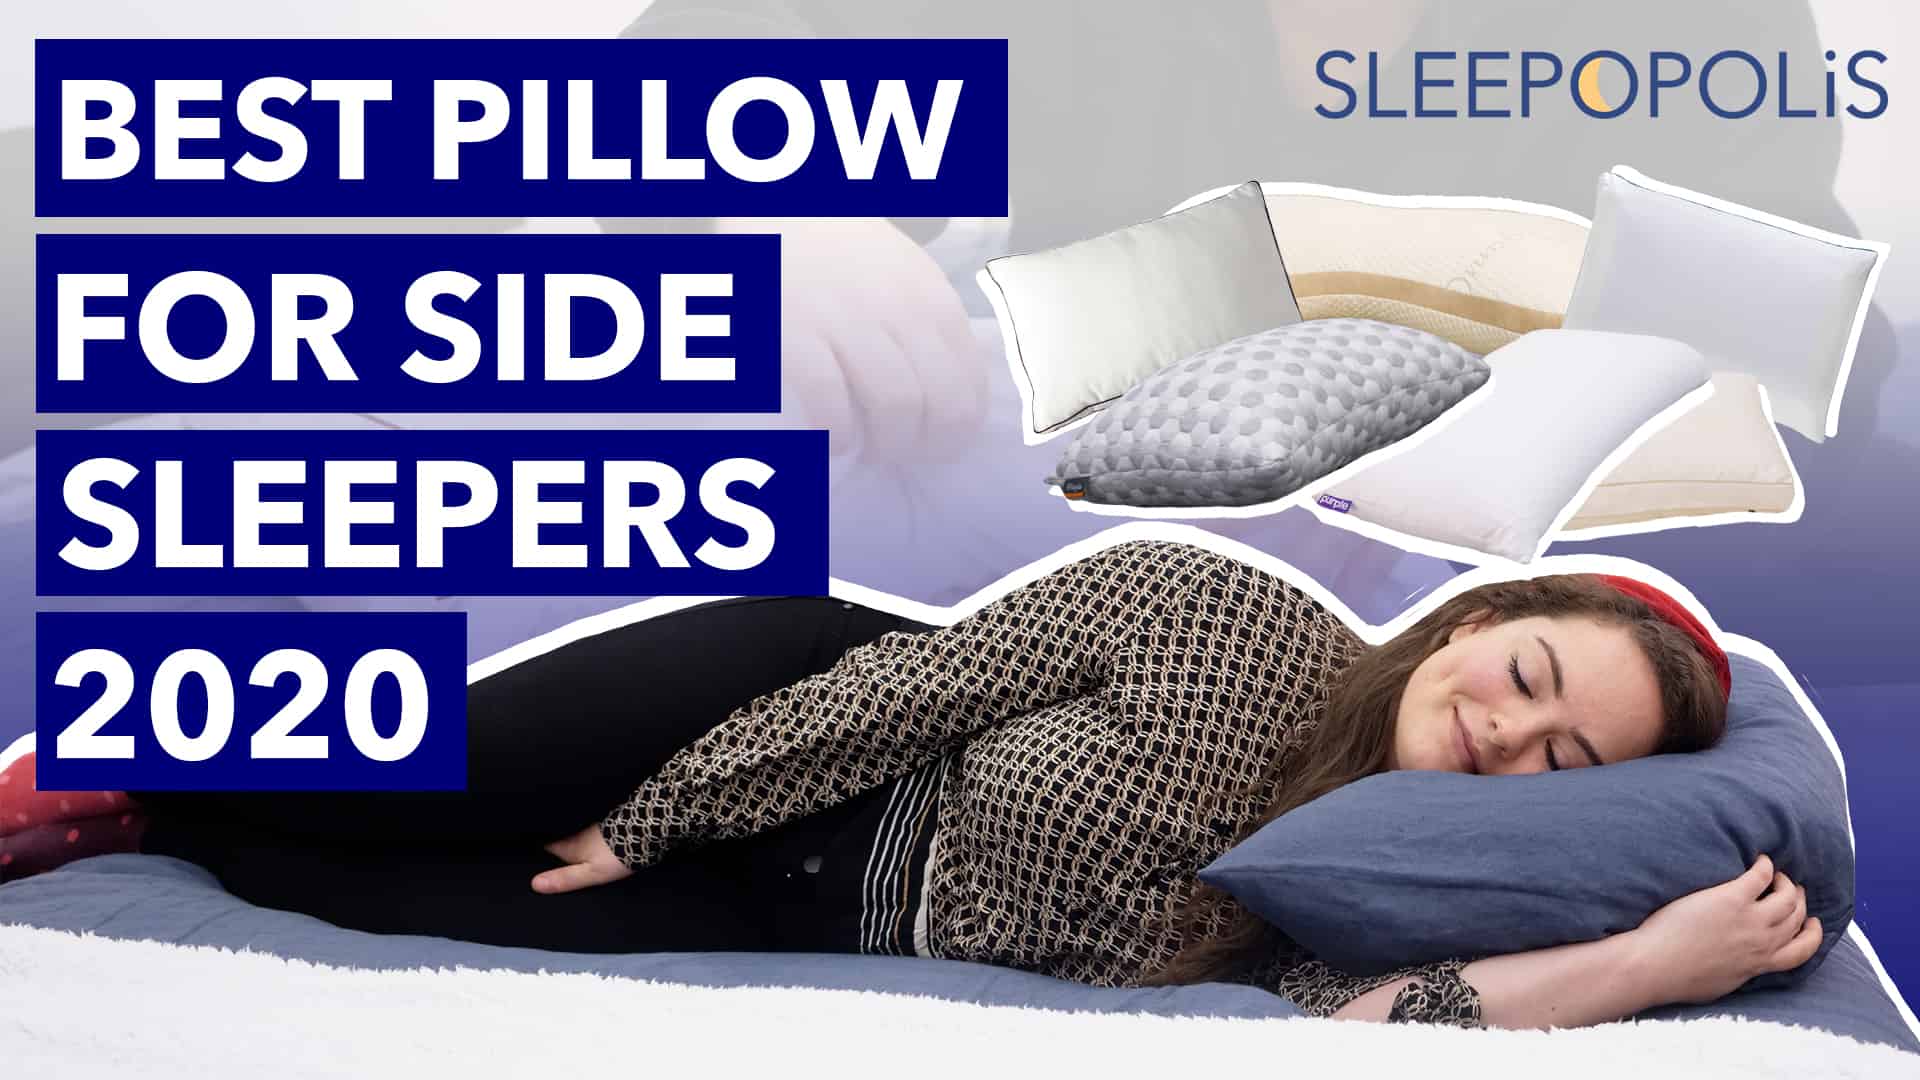 Best Pillows For Side Sleepers 2020 More Support To Avoid Neck